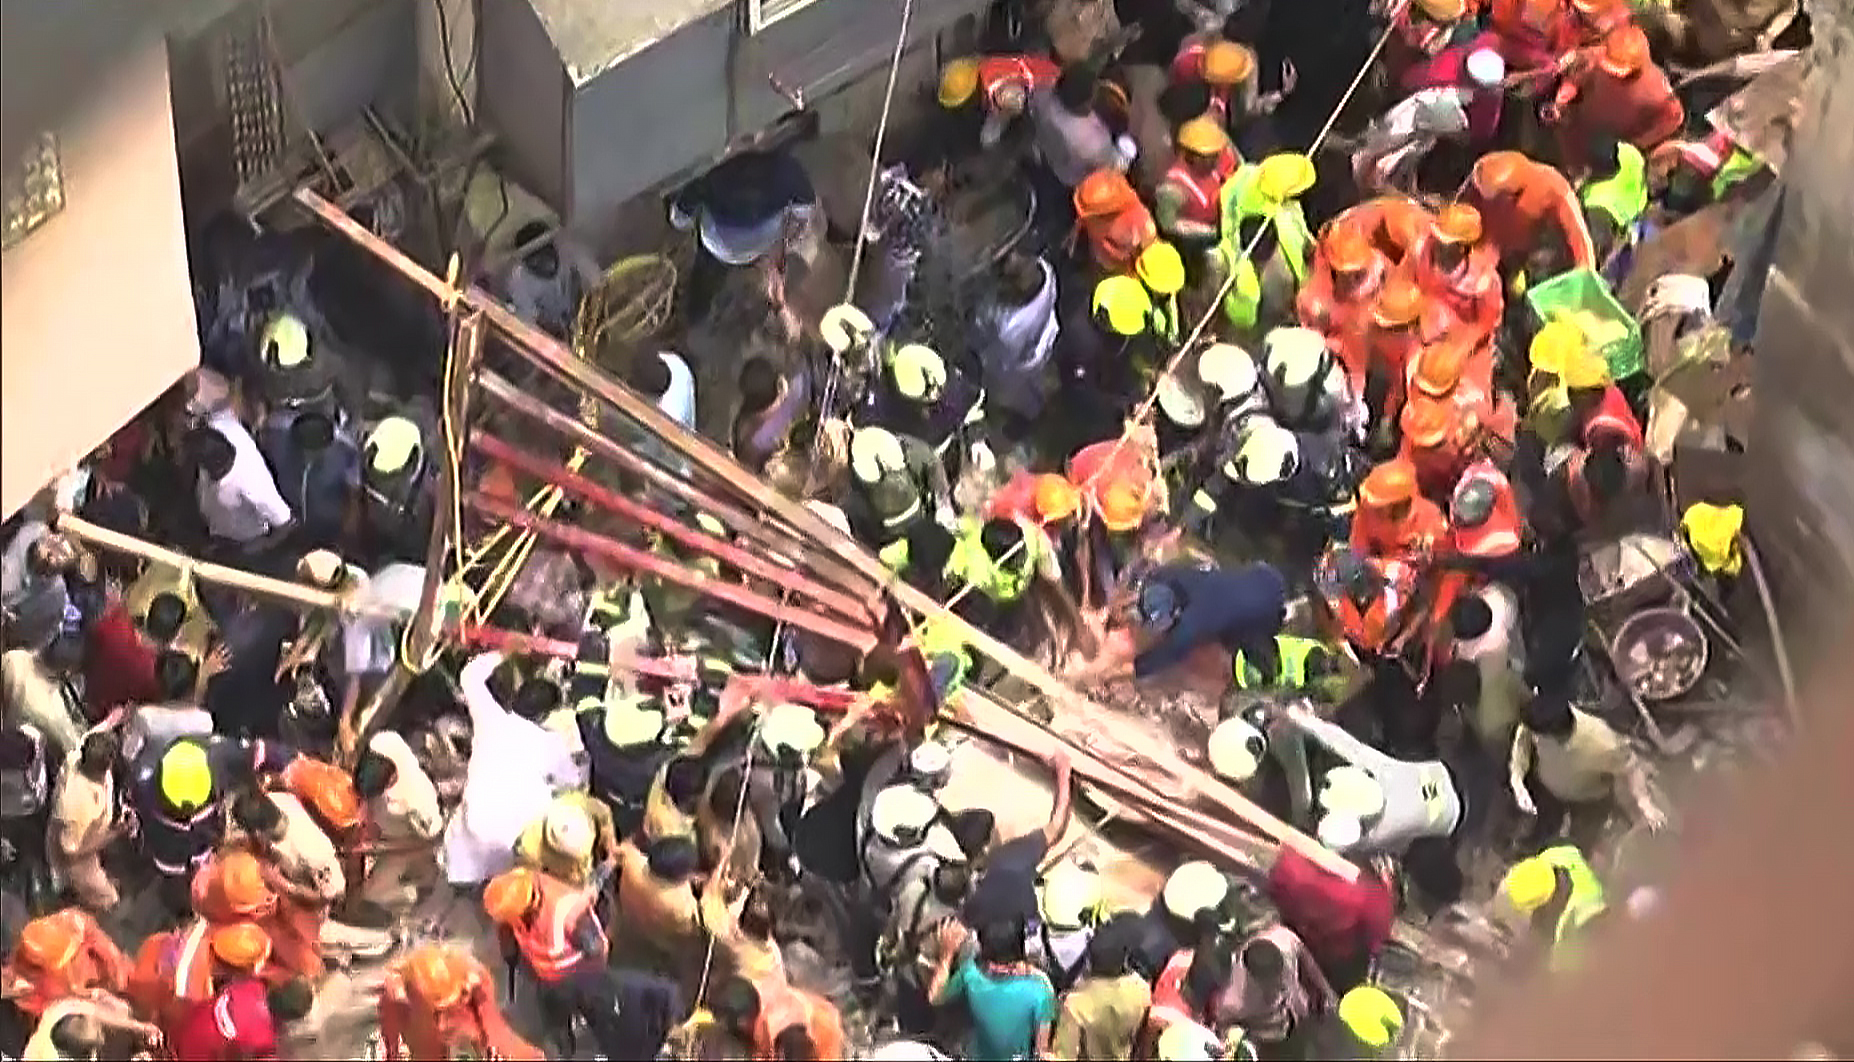 14 rescued after Mumbai building collapse